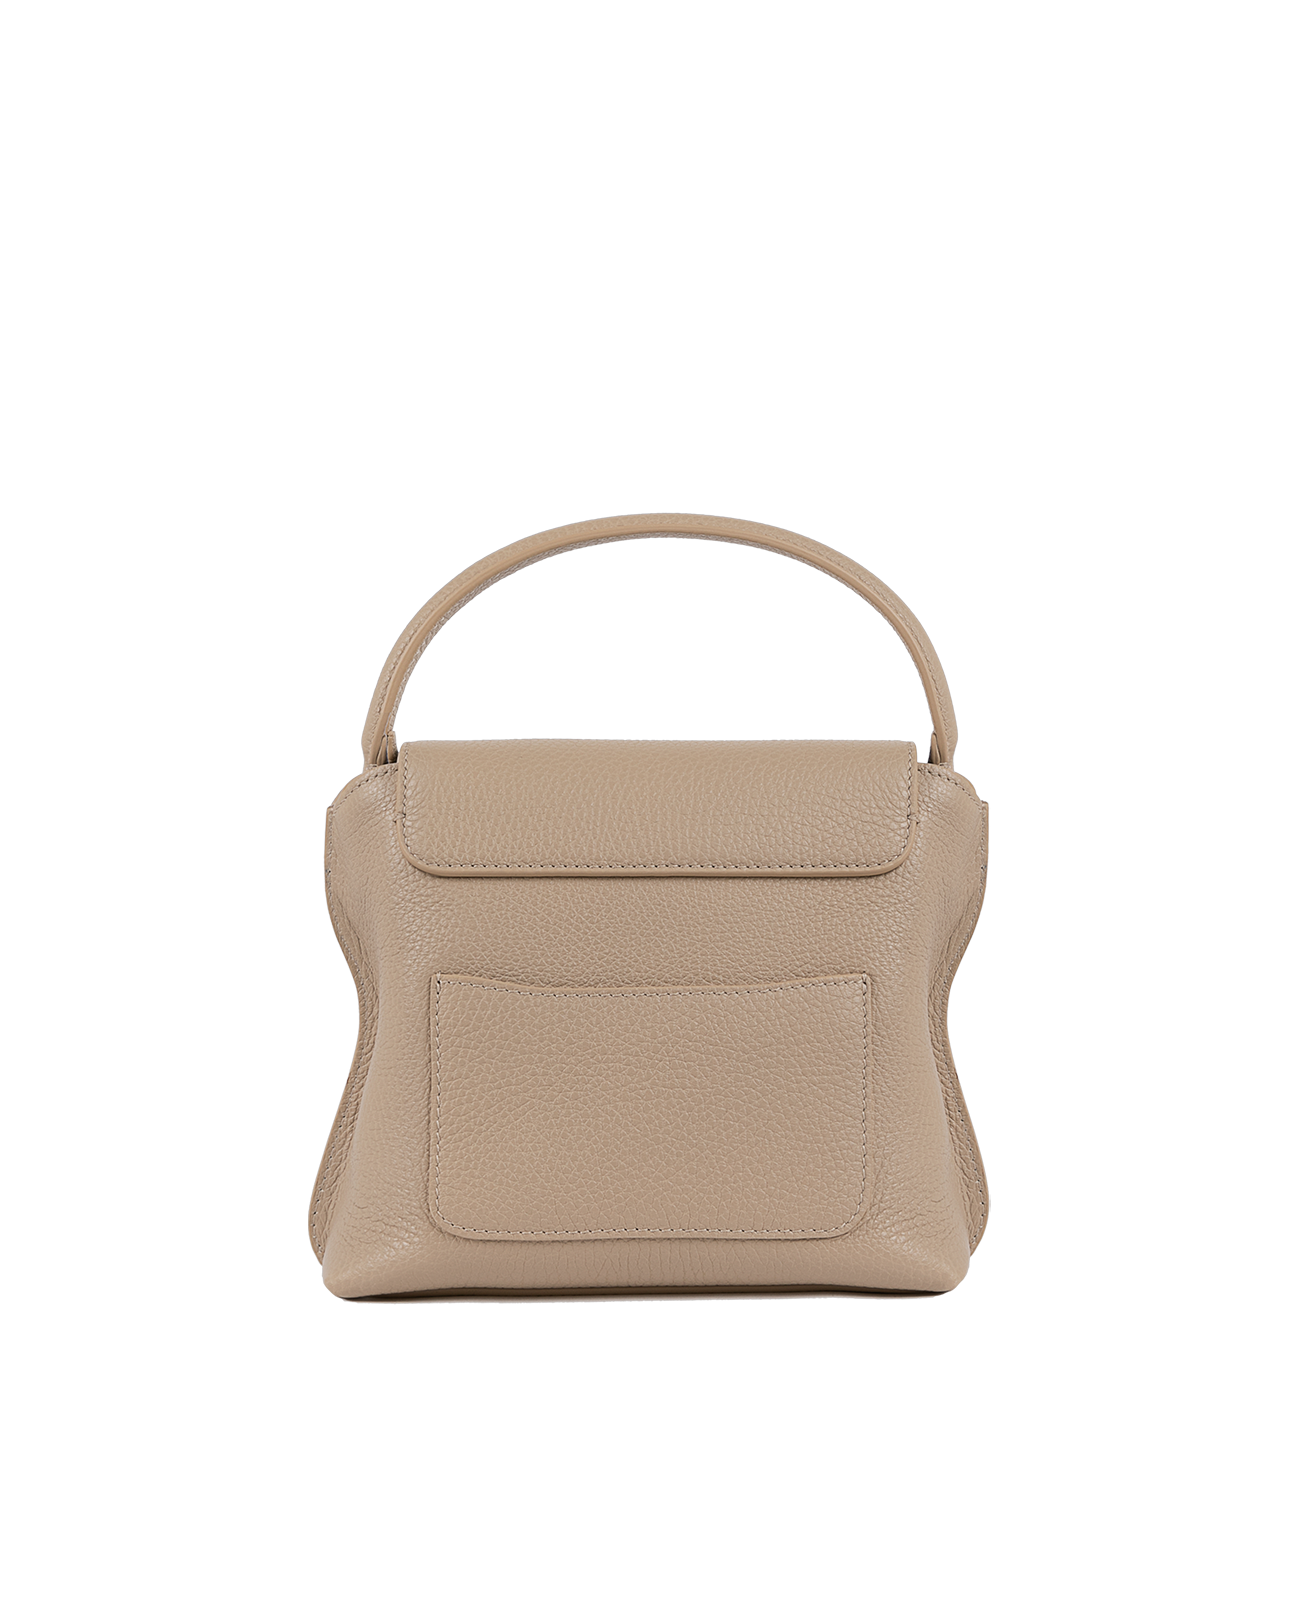 Cross-body bag in Italian full-grain leather, semi-aniline calf Italian leather with detachable shoulder strap.Three compartments, zip pocket in the back compartment. Magnetic flap closure with logo. Color: Nude. Size:Medium